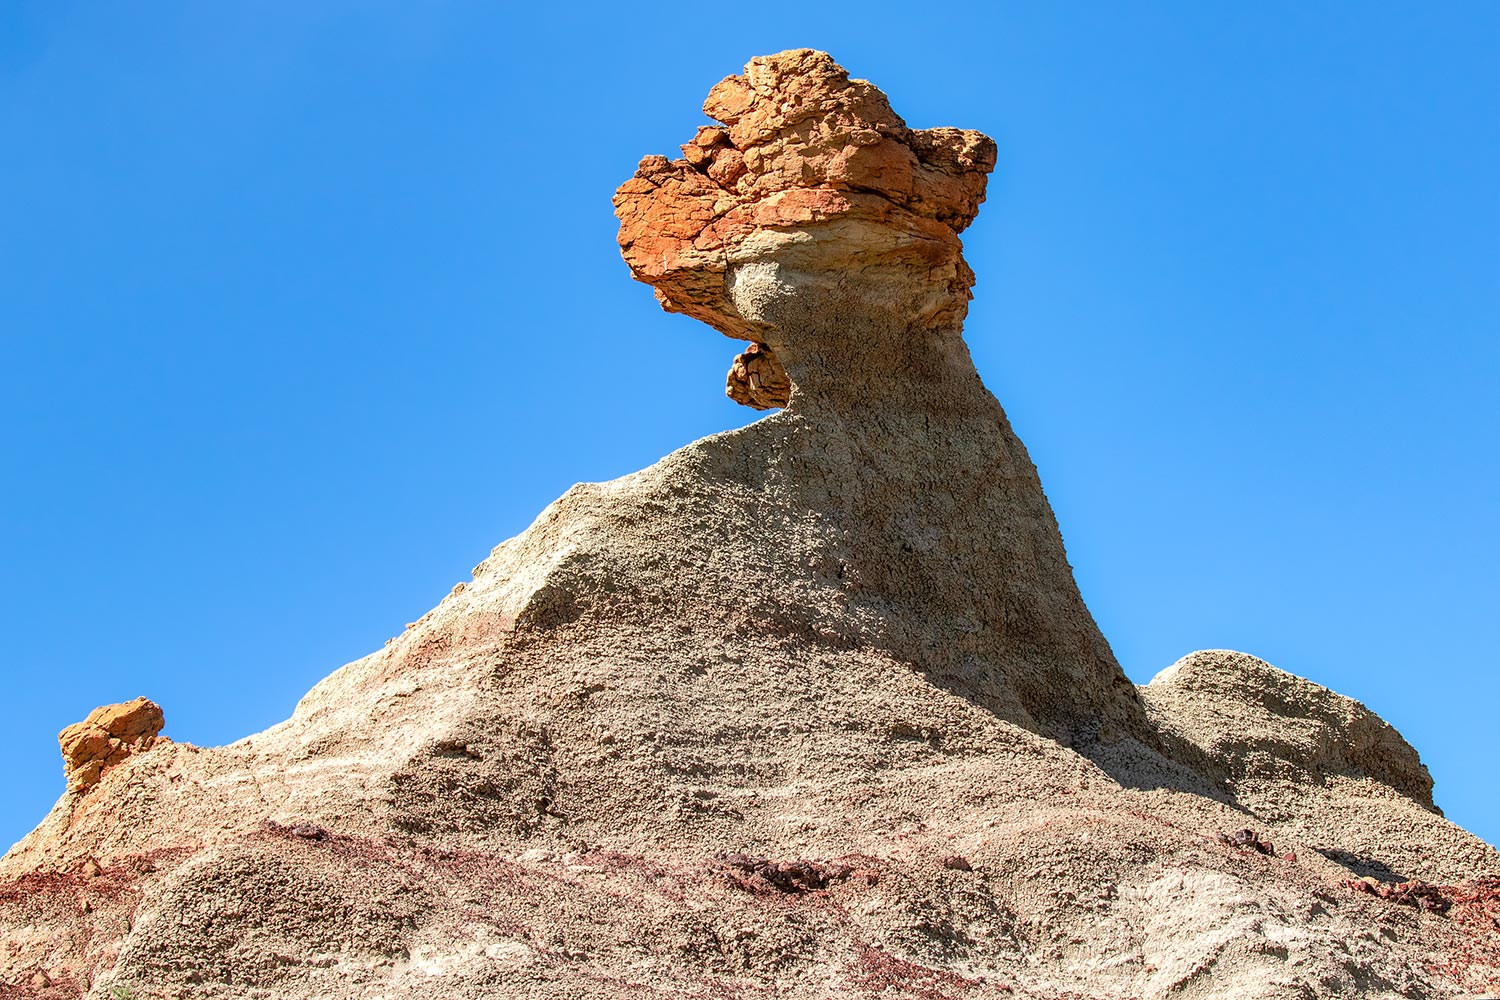 A hoodoo, or rock formation, in the Terry Badlands near Terry, Montana.&nbsp;→ Buy a Print&nbsp;or&nbsp;License Photo